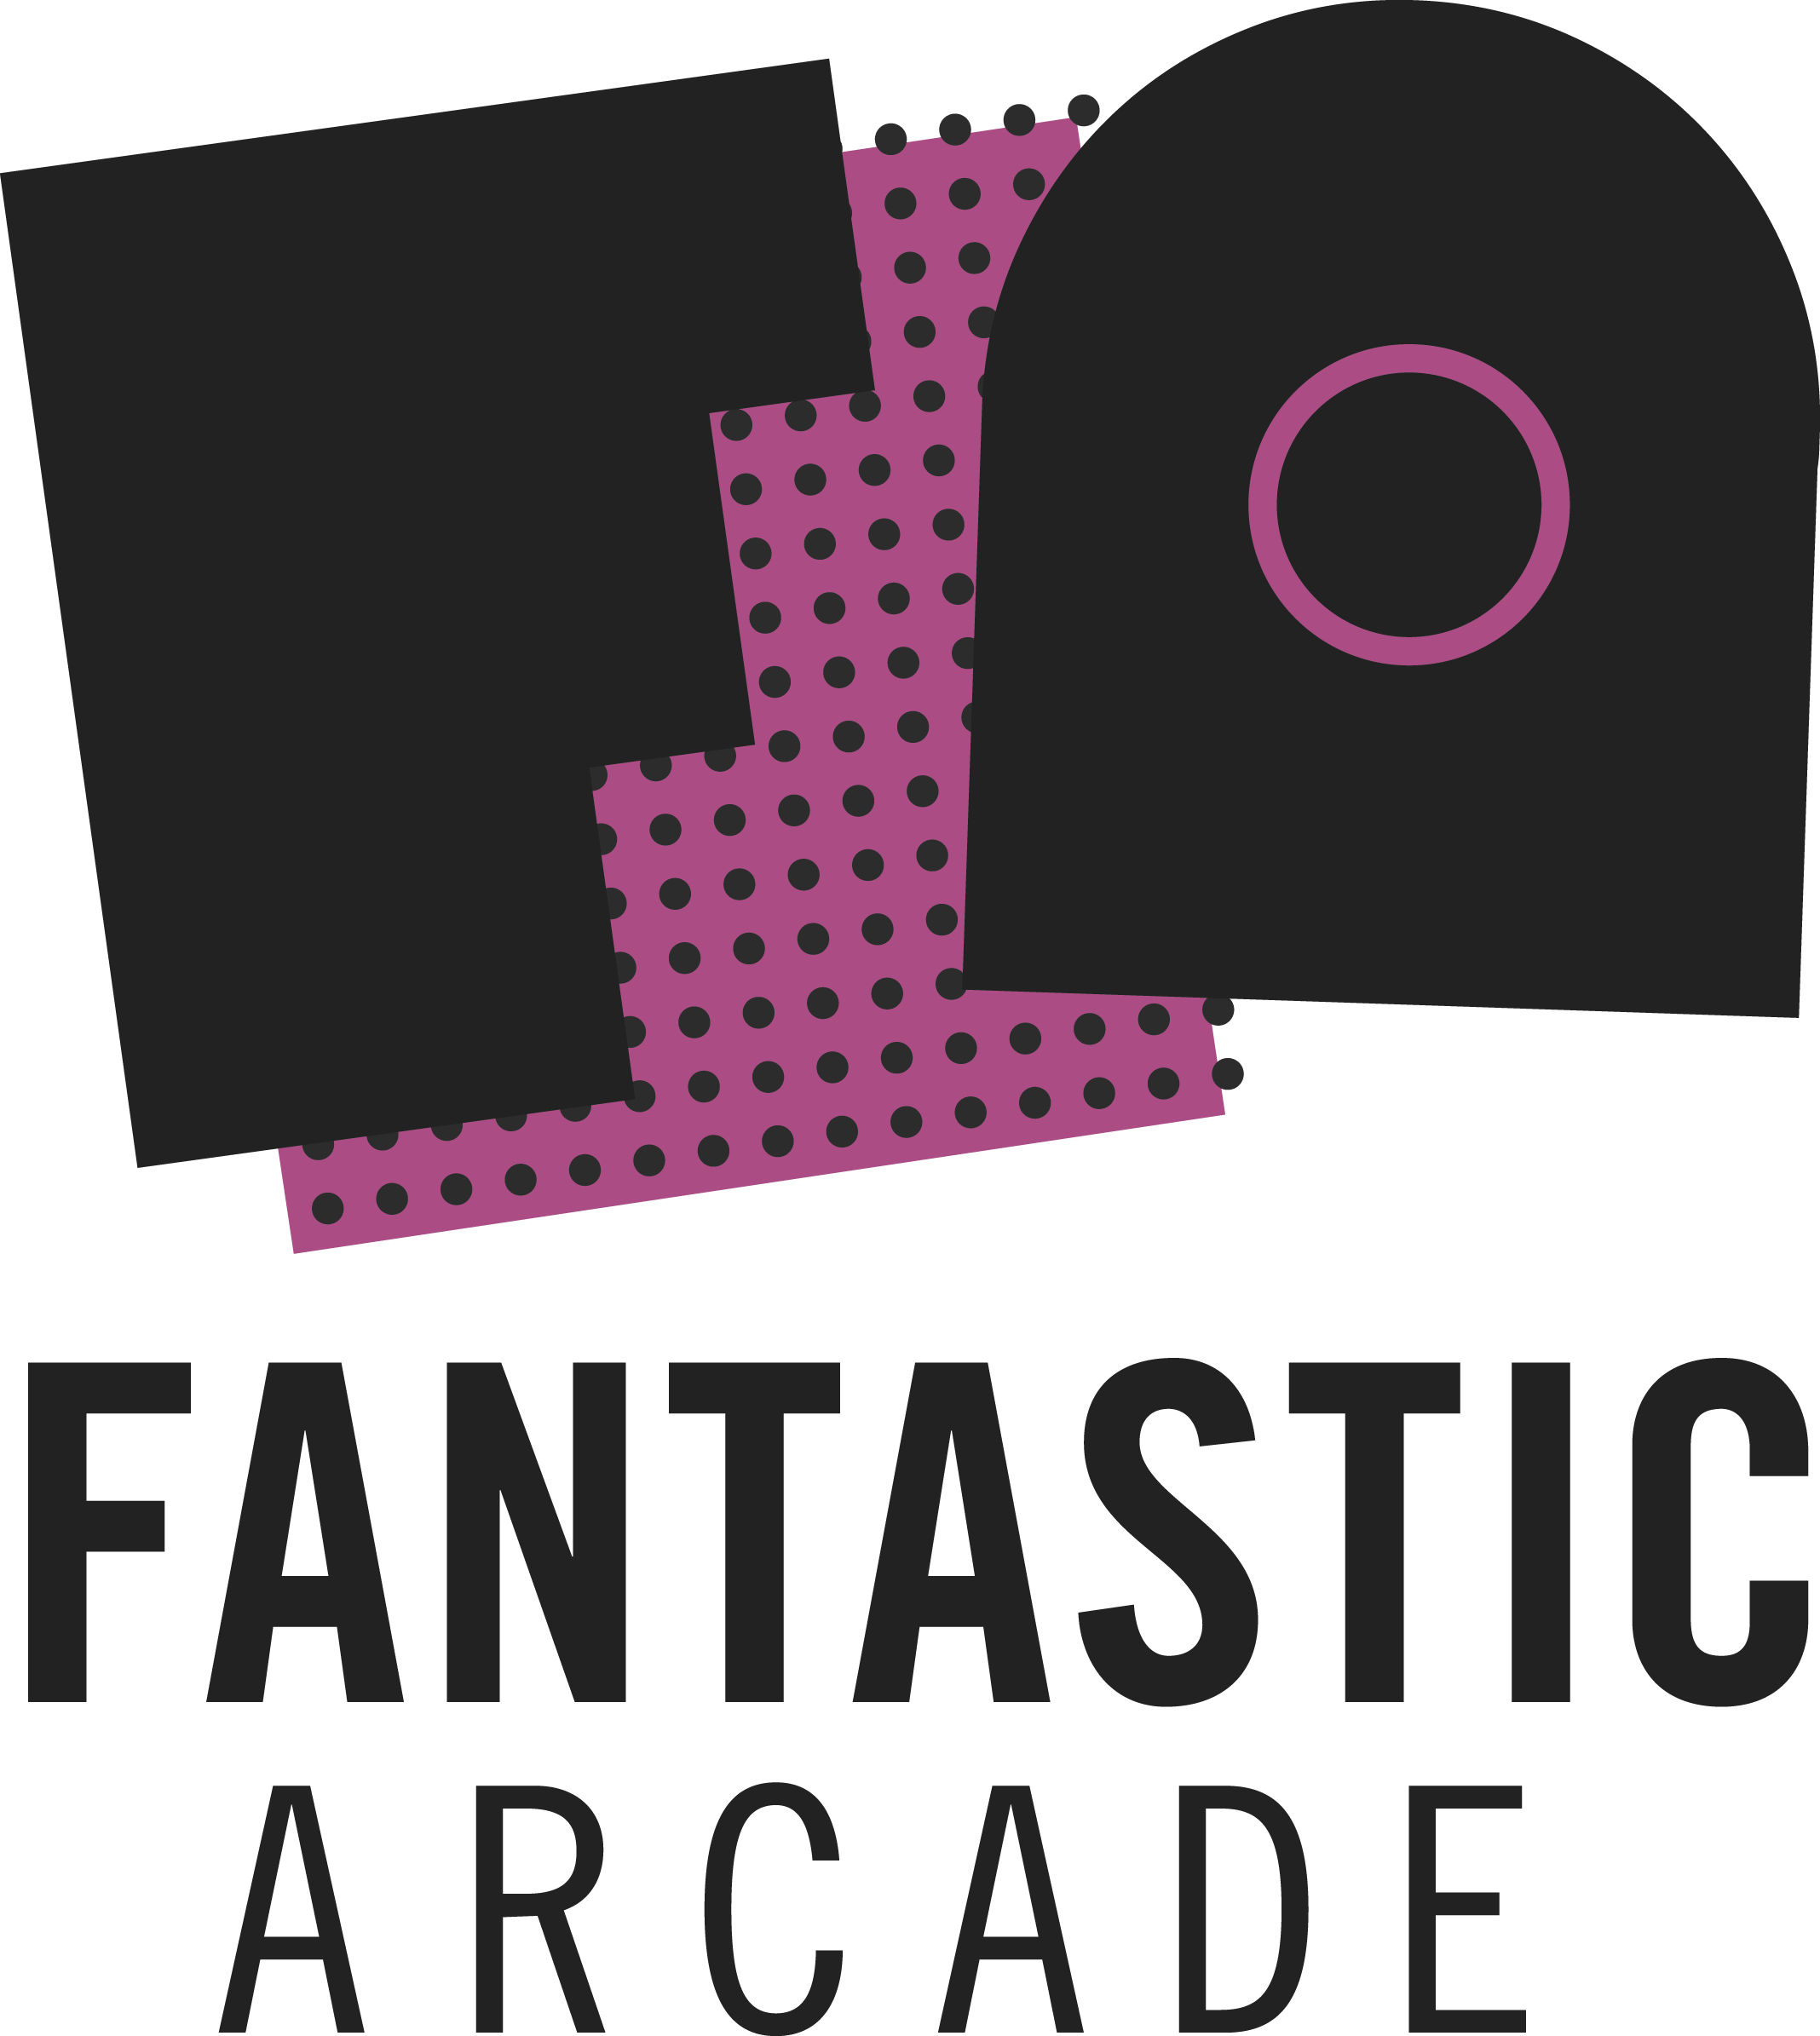 A link to the Fantastic Arcade homepage.